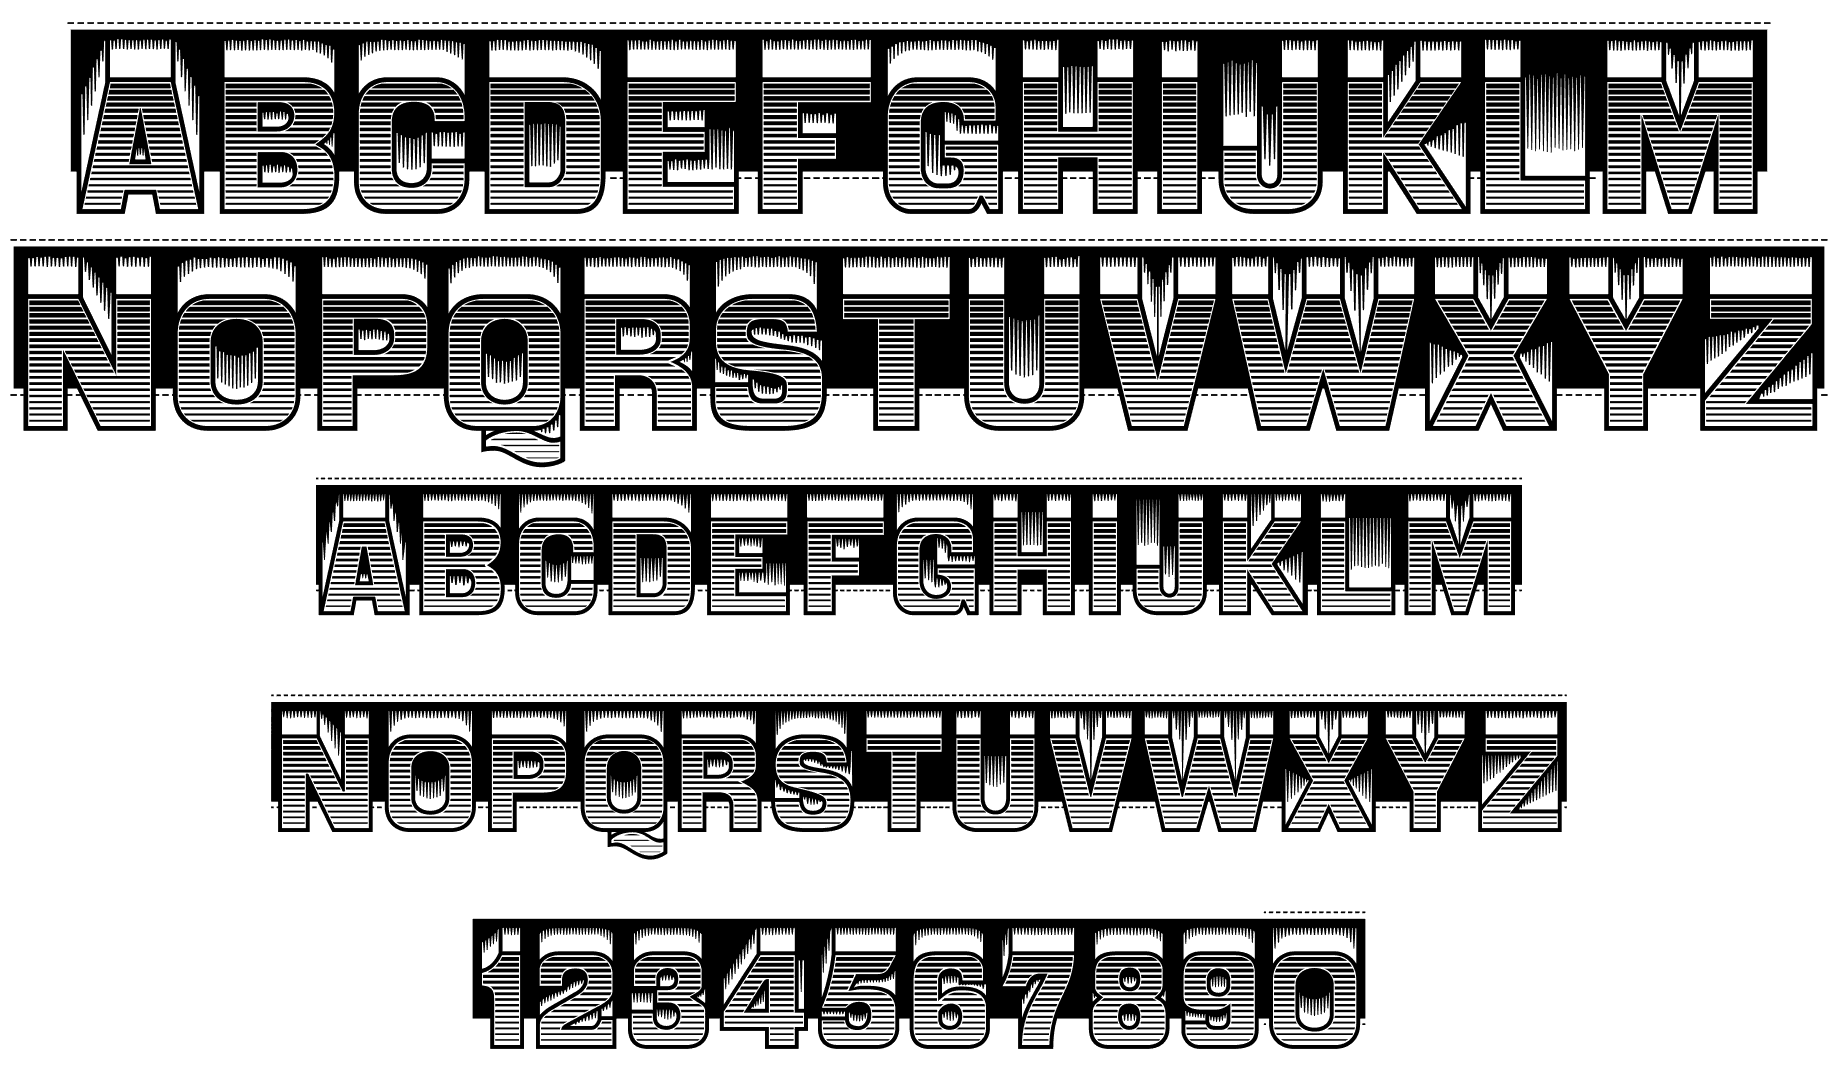 Basic character set of the Relievo typeface